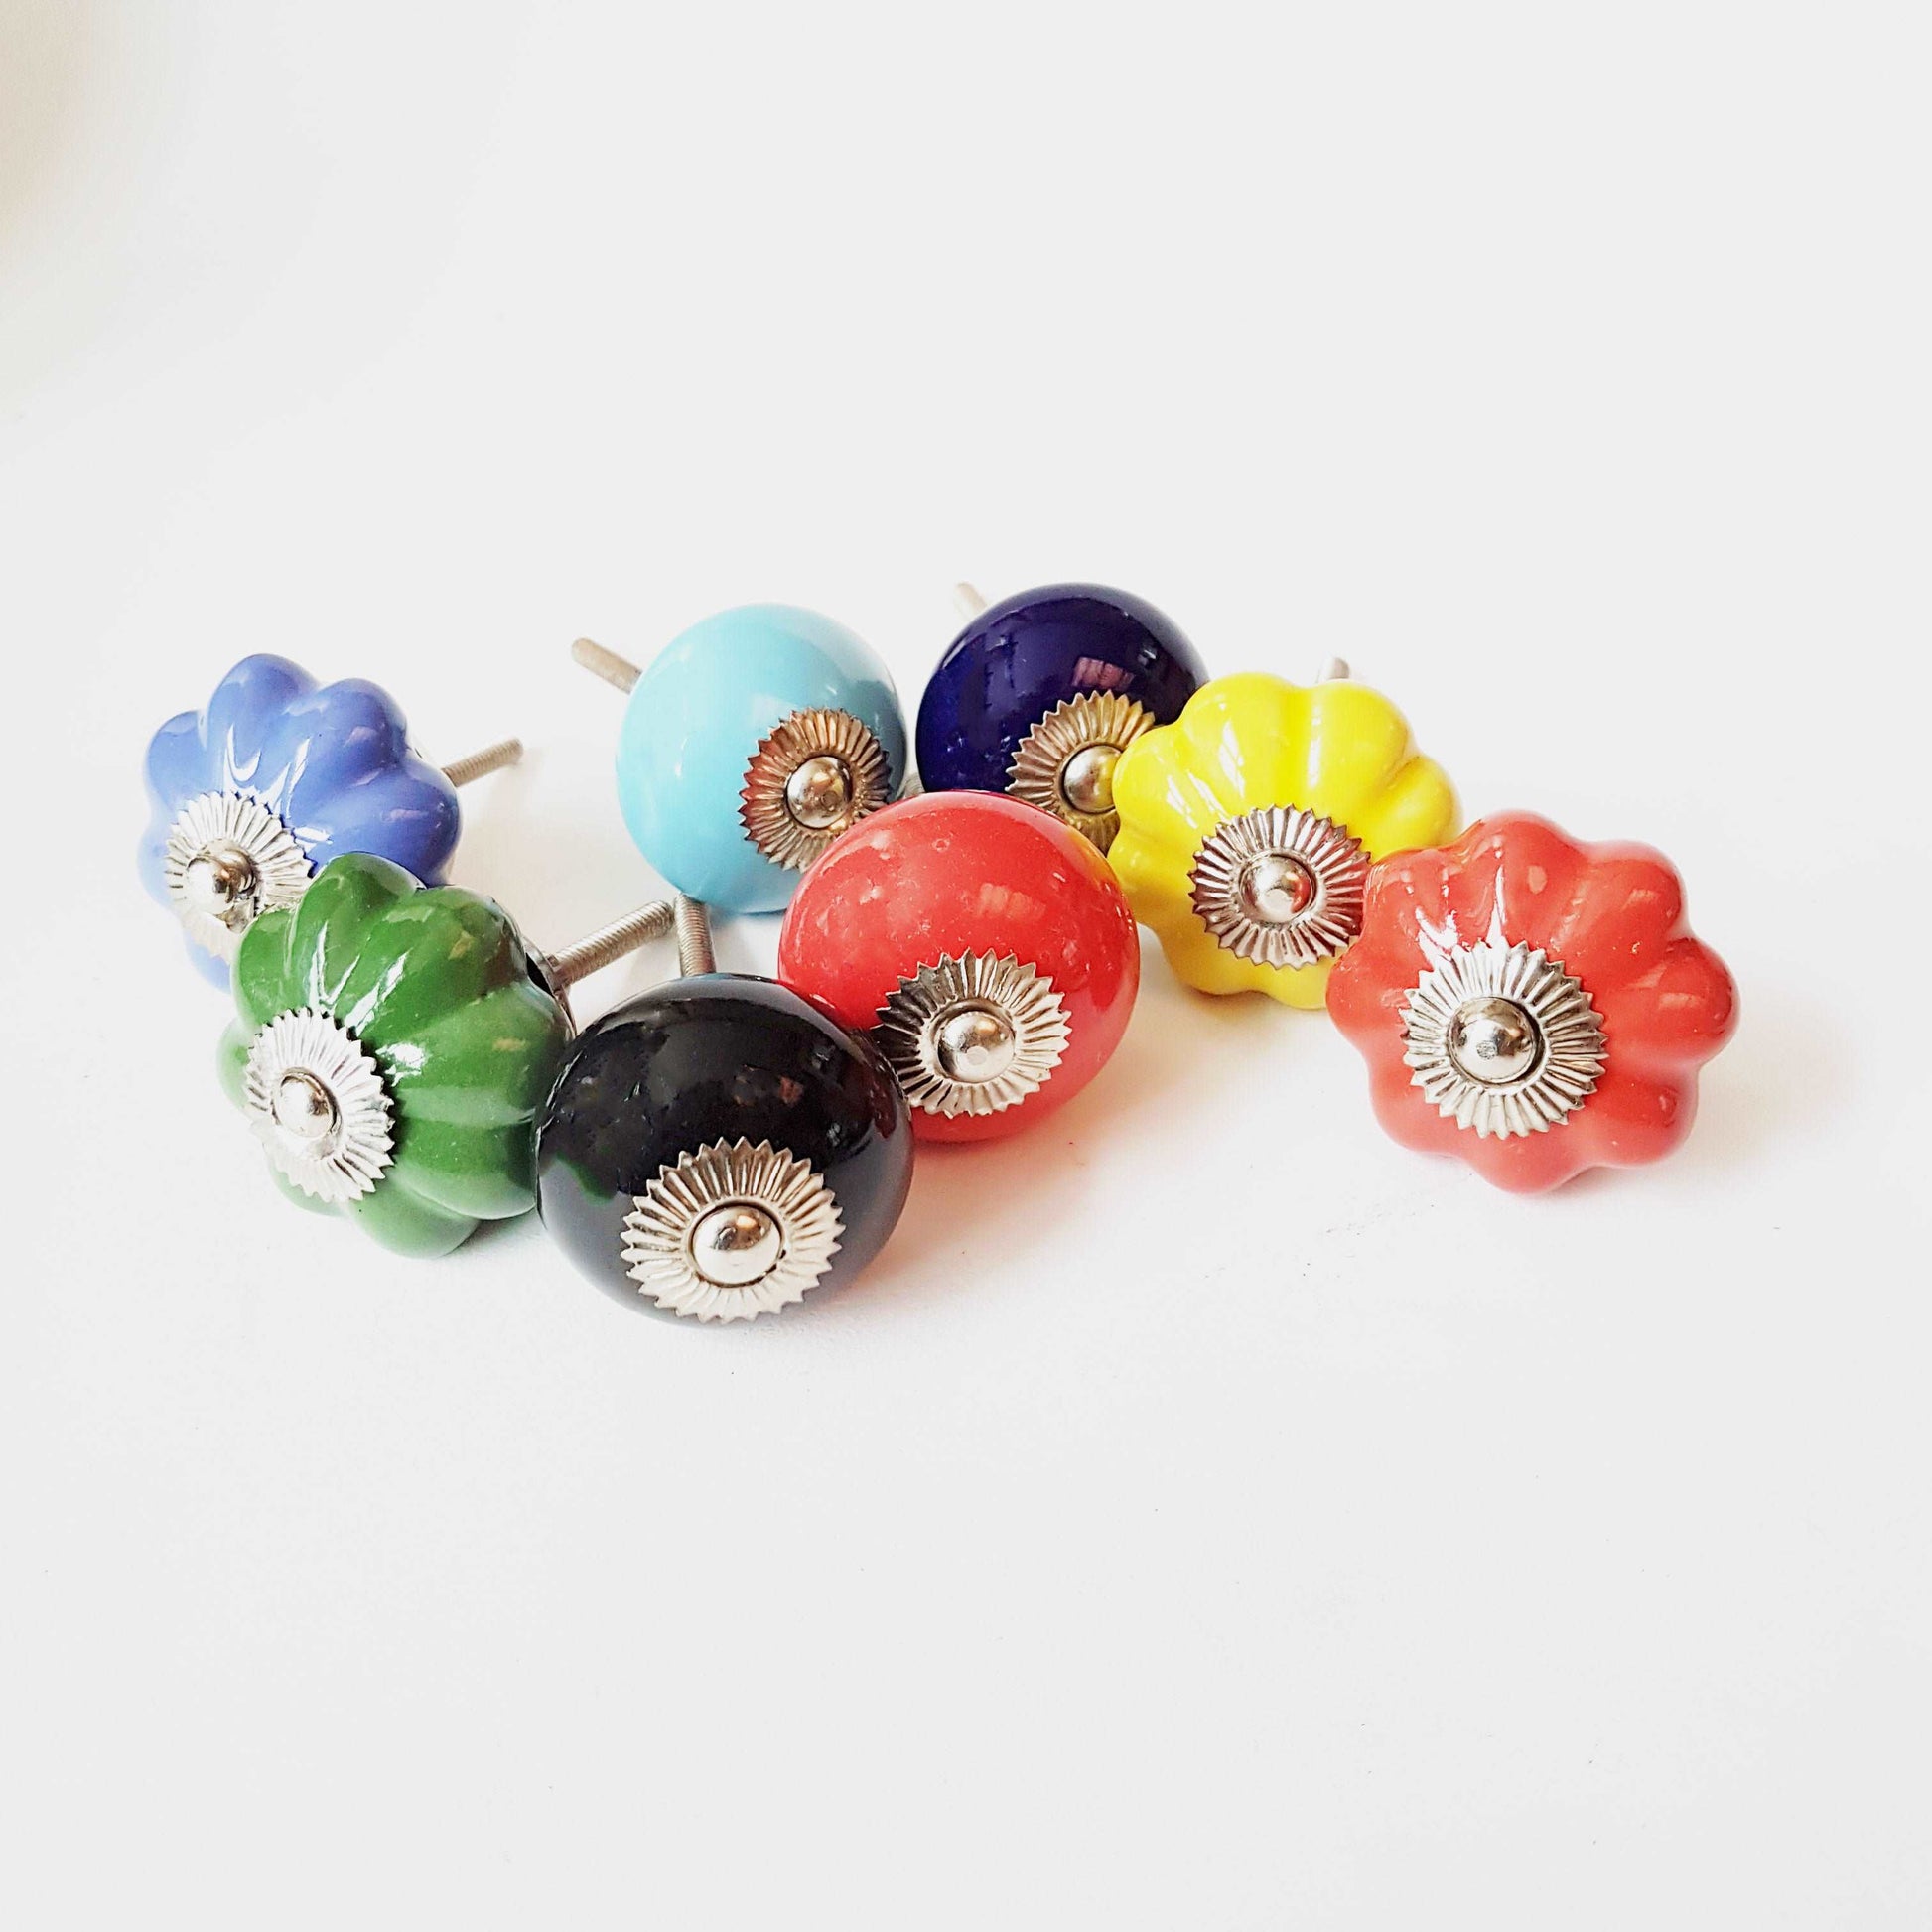 8 cabinet knobs-drawer pulls for cupboards & dressers. Ceramic 8 piece hardware set of vibrant solid colors. 1.5 inch diameter.